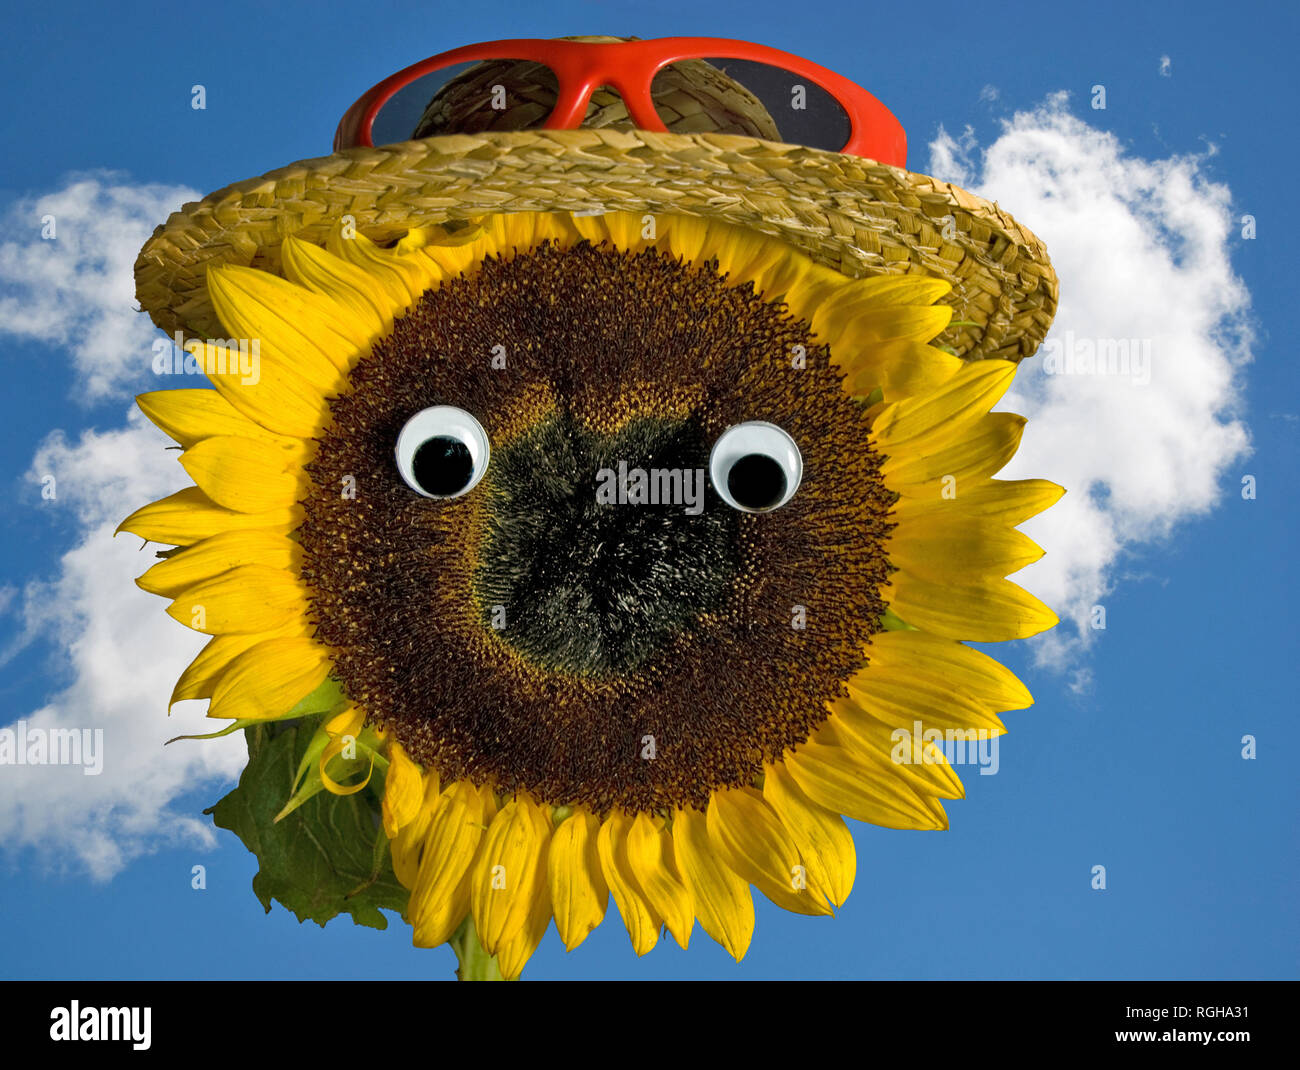 yellow sunflower with straw hat and red sunglasses on summer sky background Stock Photo